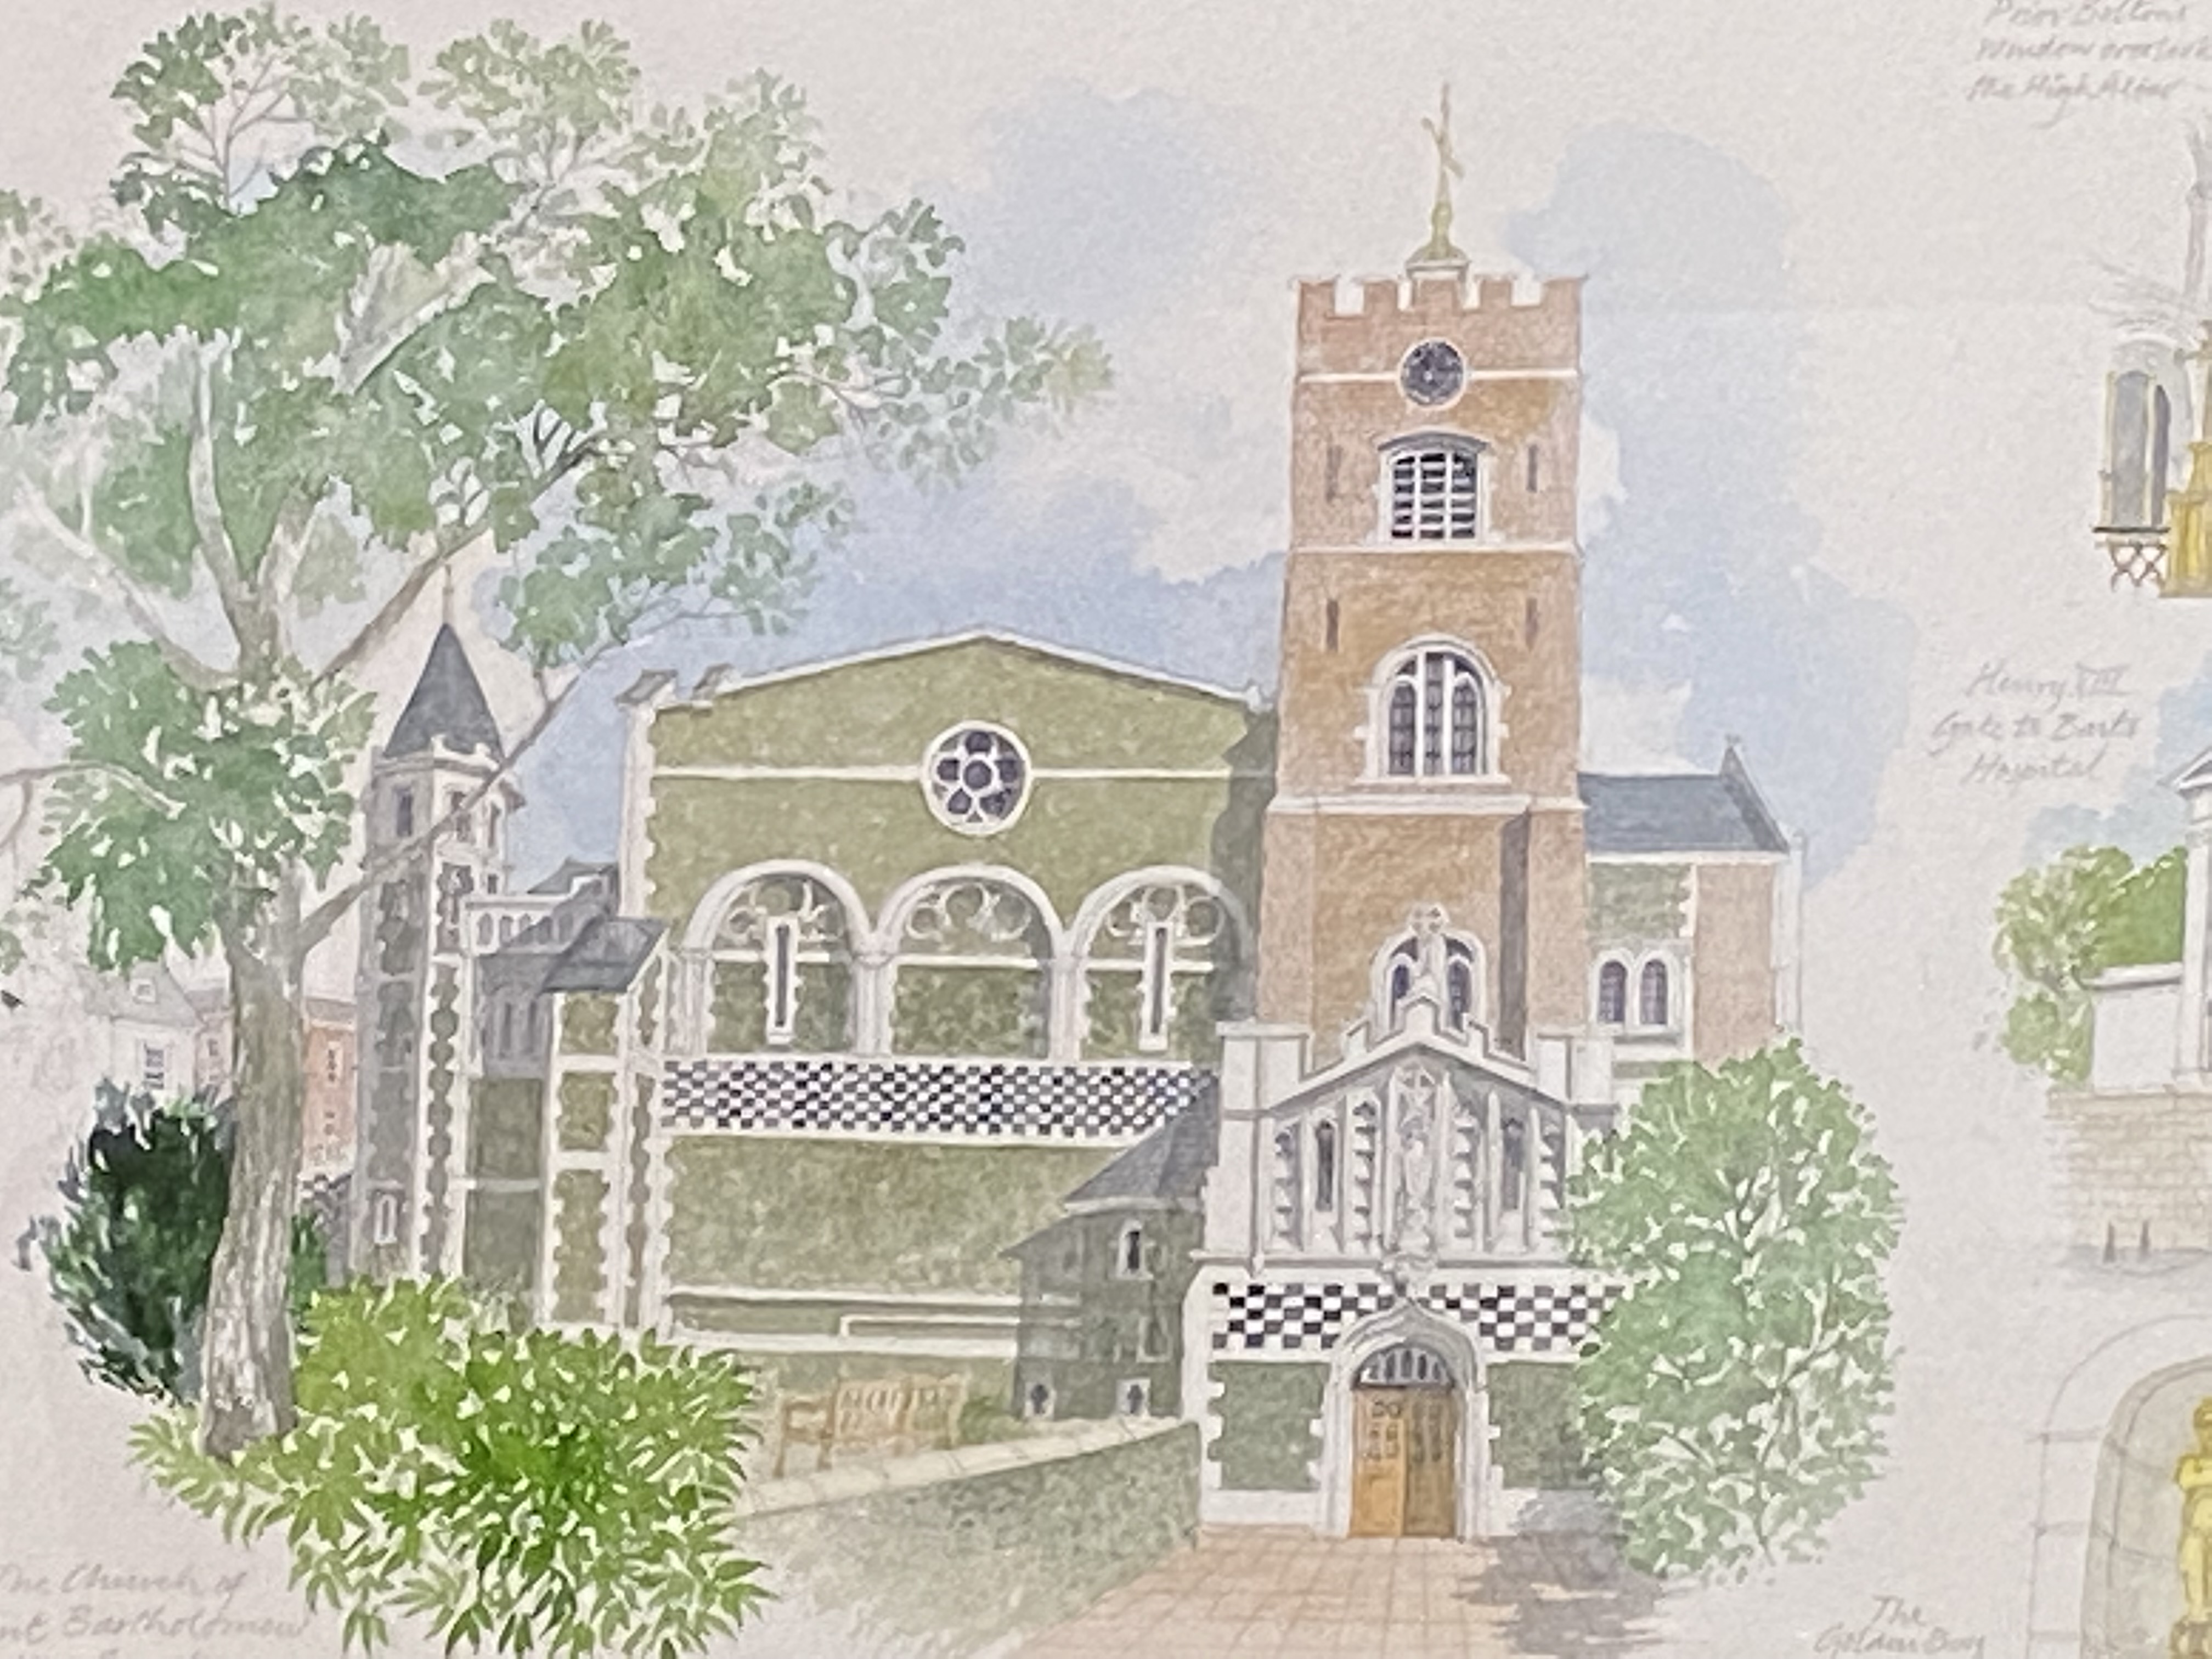 Watercolour of the Church of St. Bartholomew the Great - Image 4 of 5